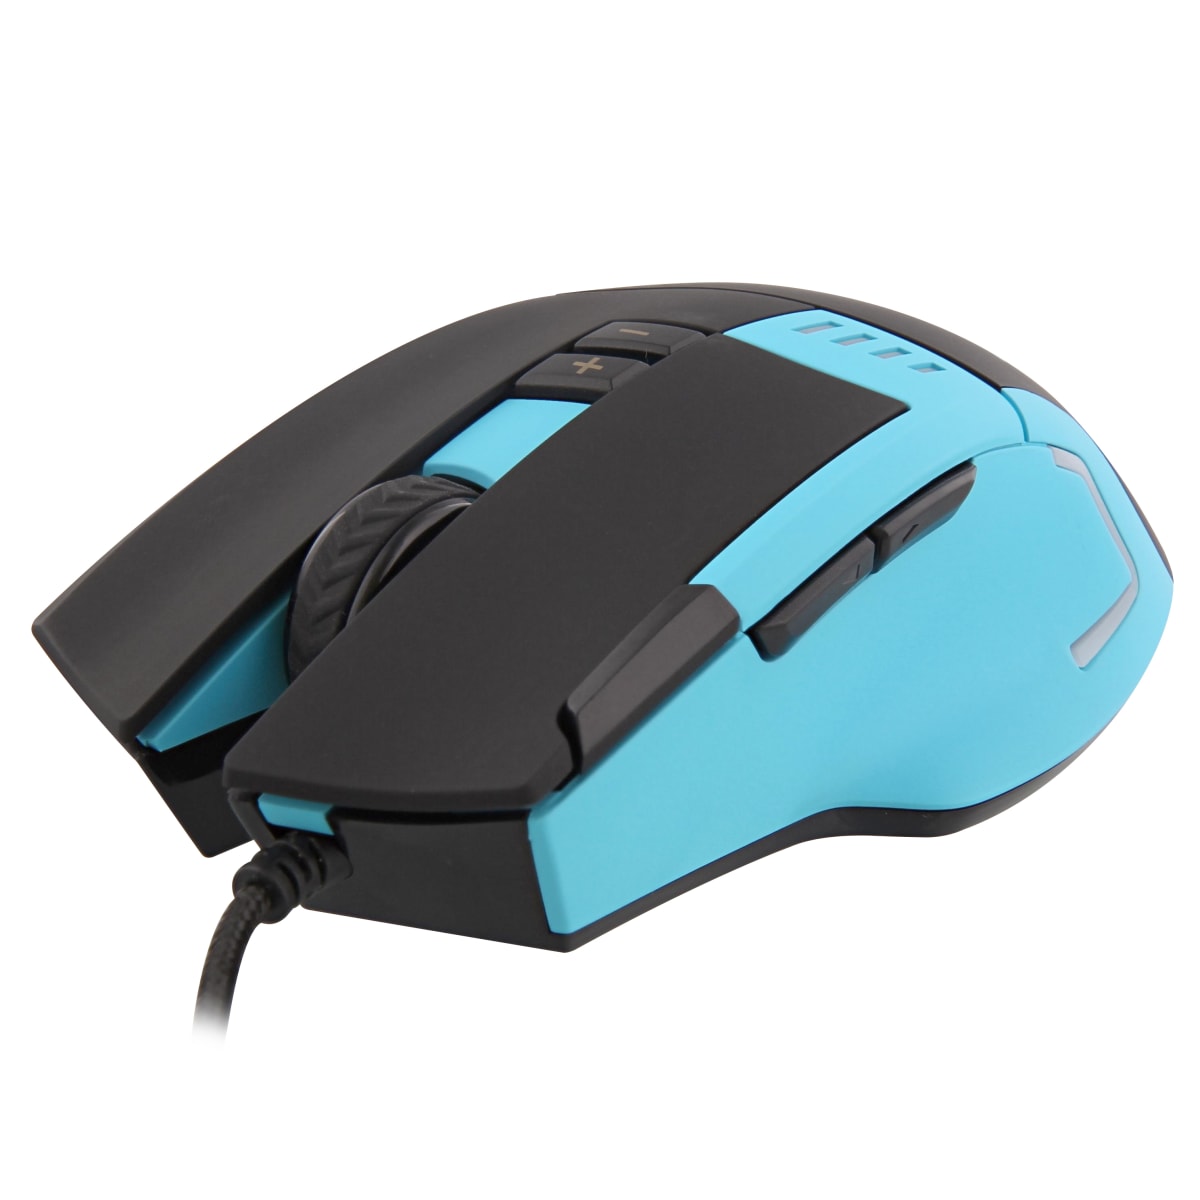 FURY gaming mouse